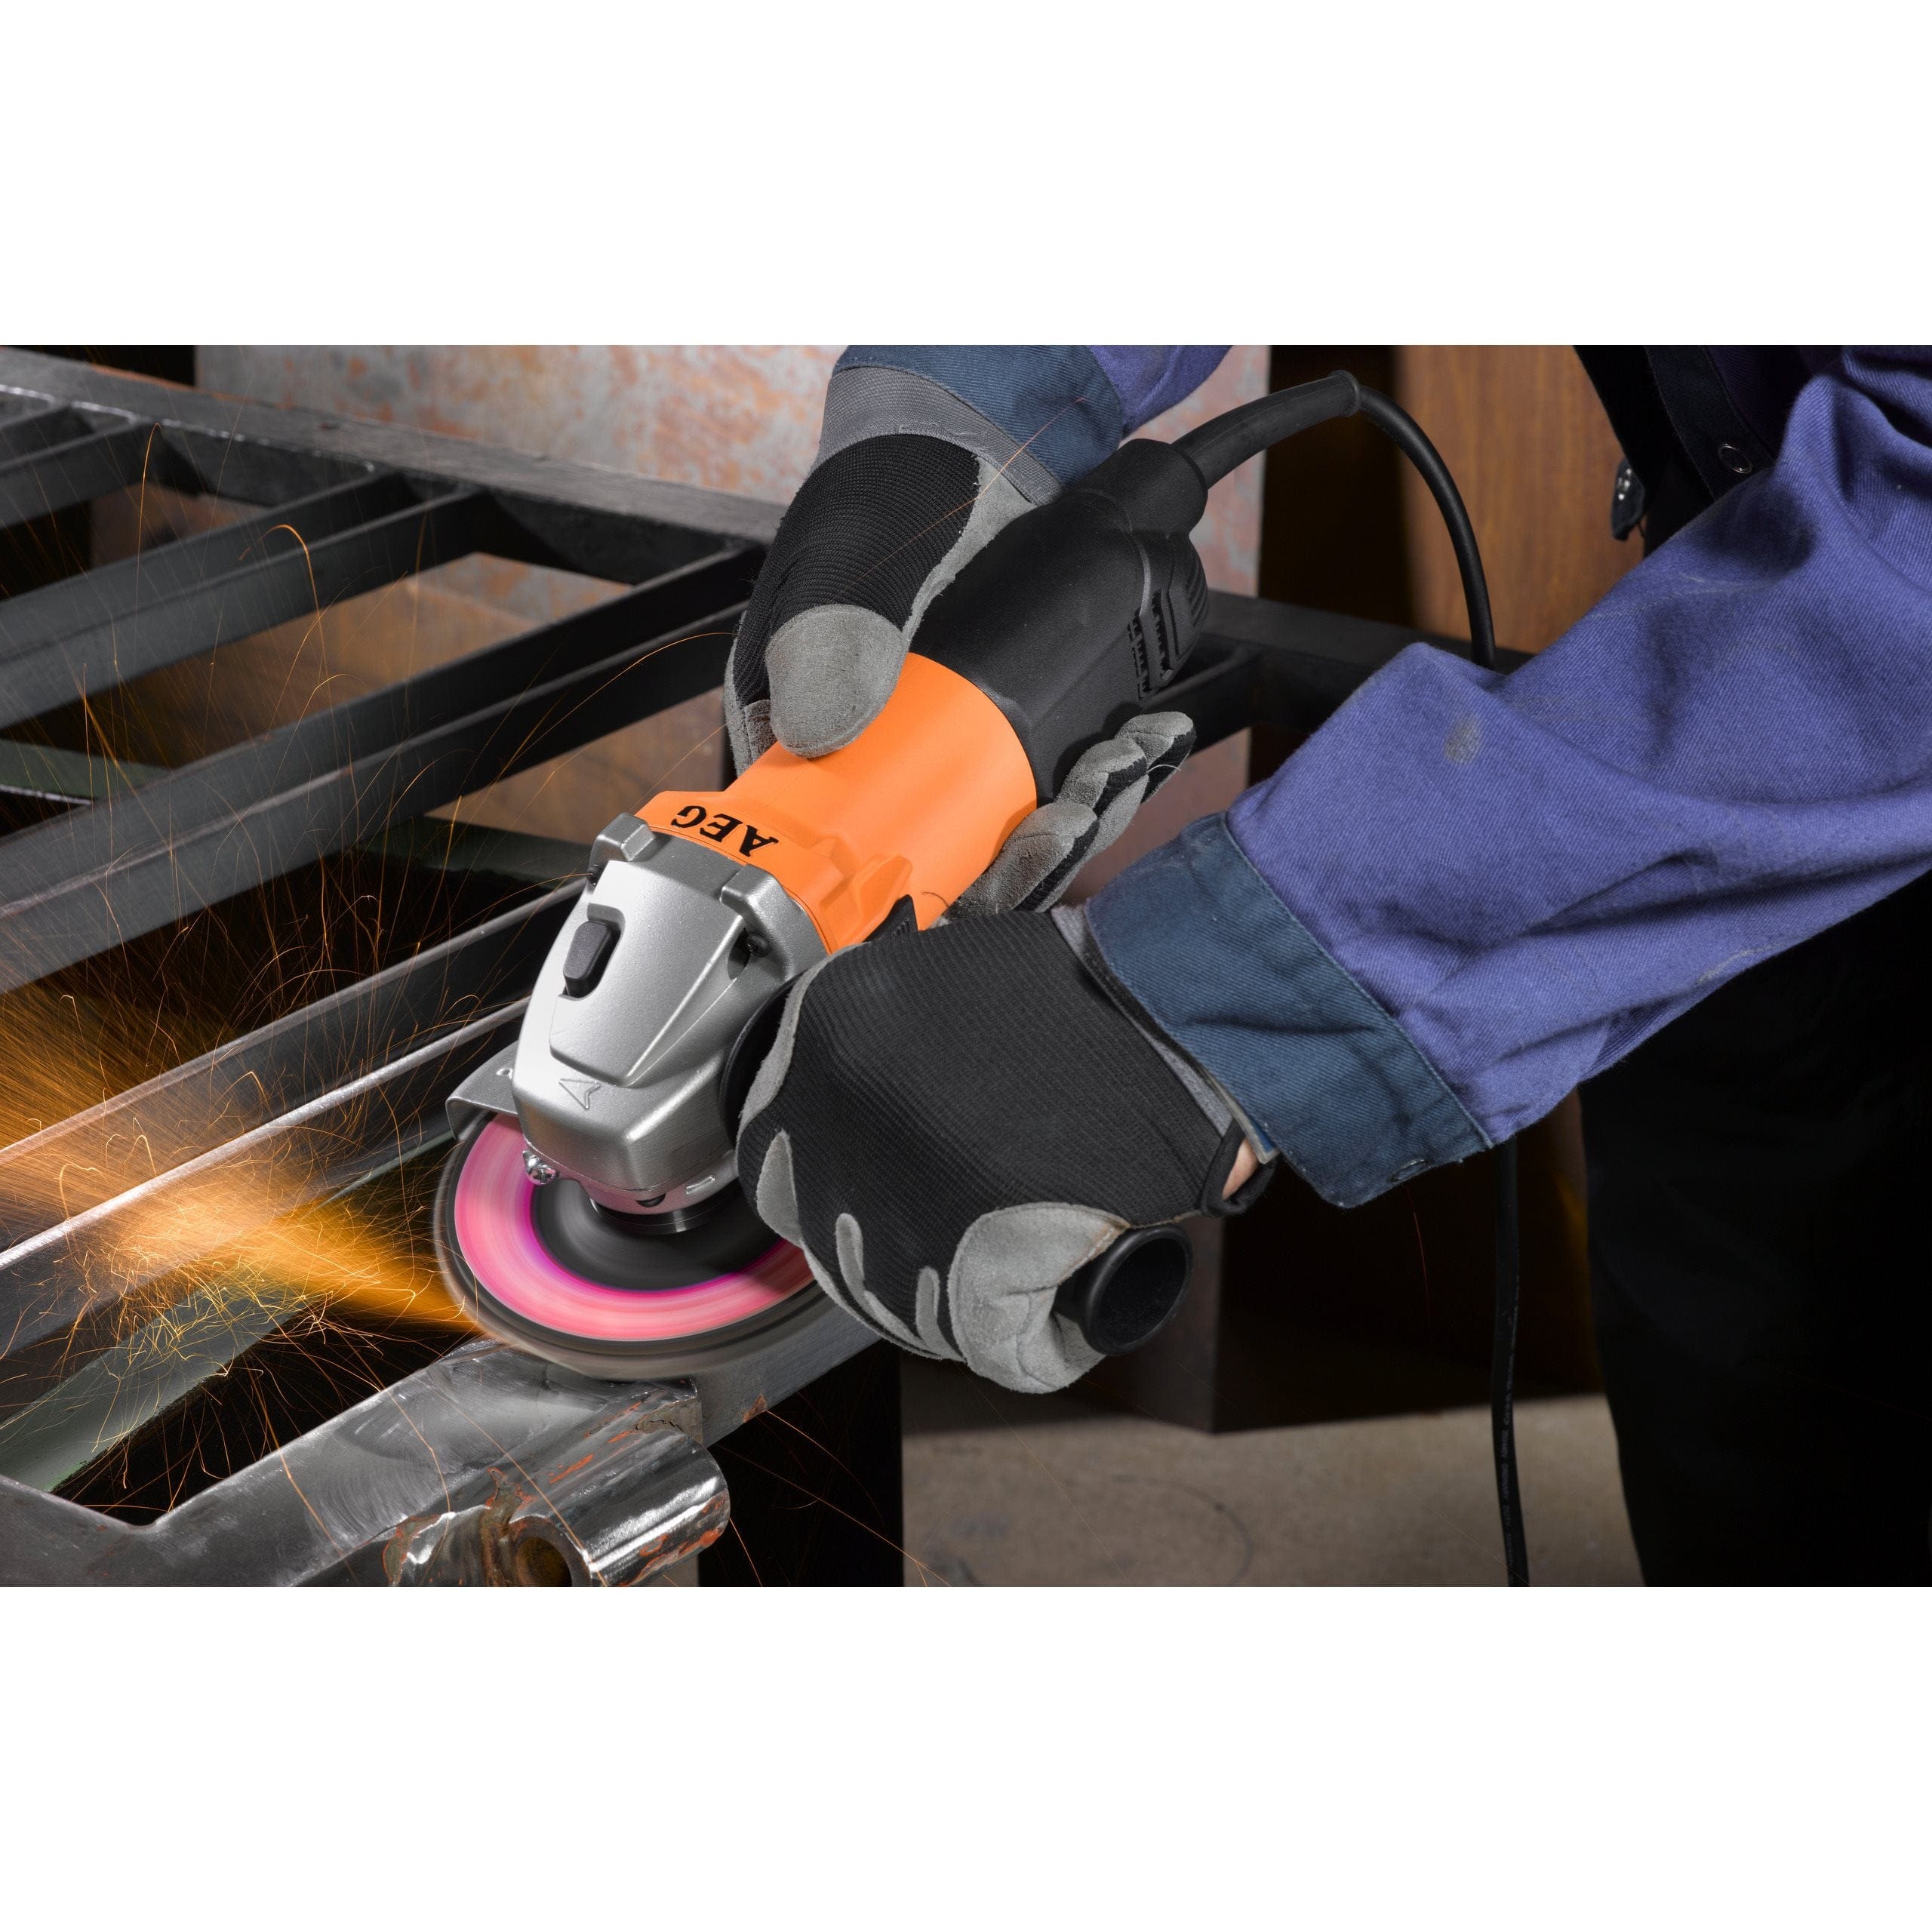 AEG 4.5" (115mm) Angle Grinder 800W - WS8-115 | Supply Master Accra, Ghana Grinder Buy Tools hardware Building materials